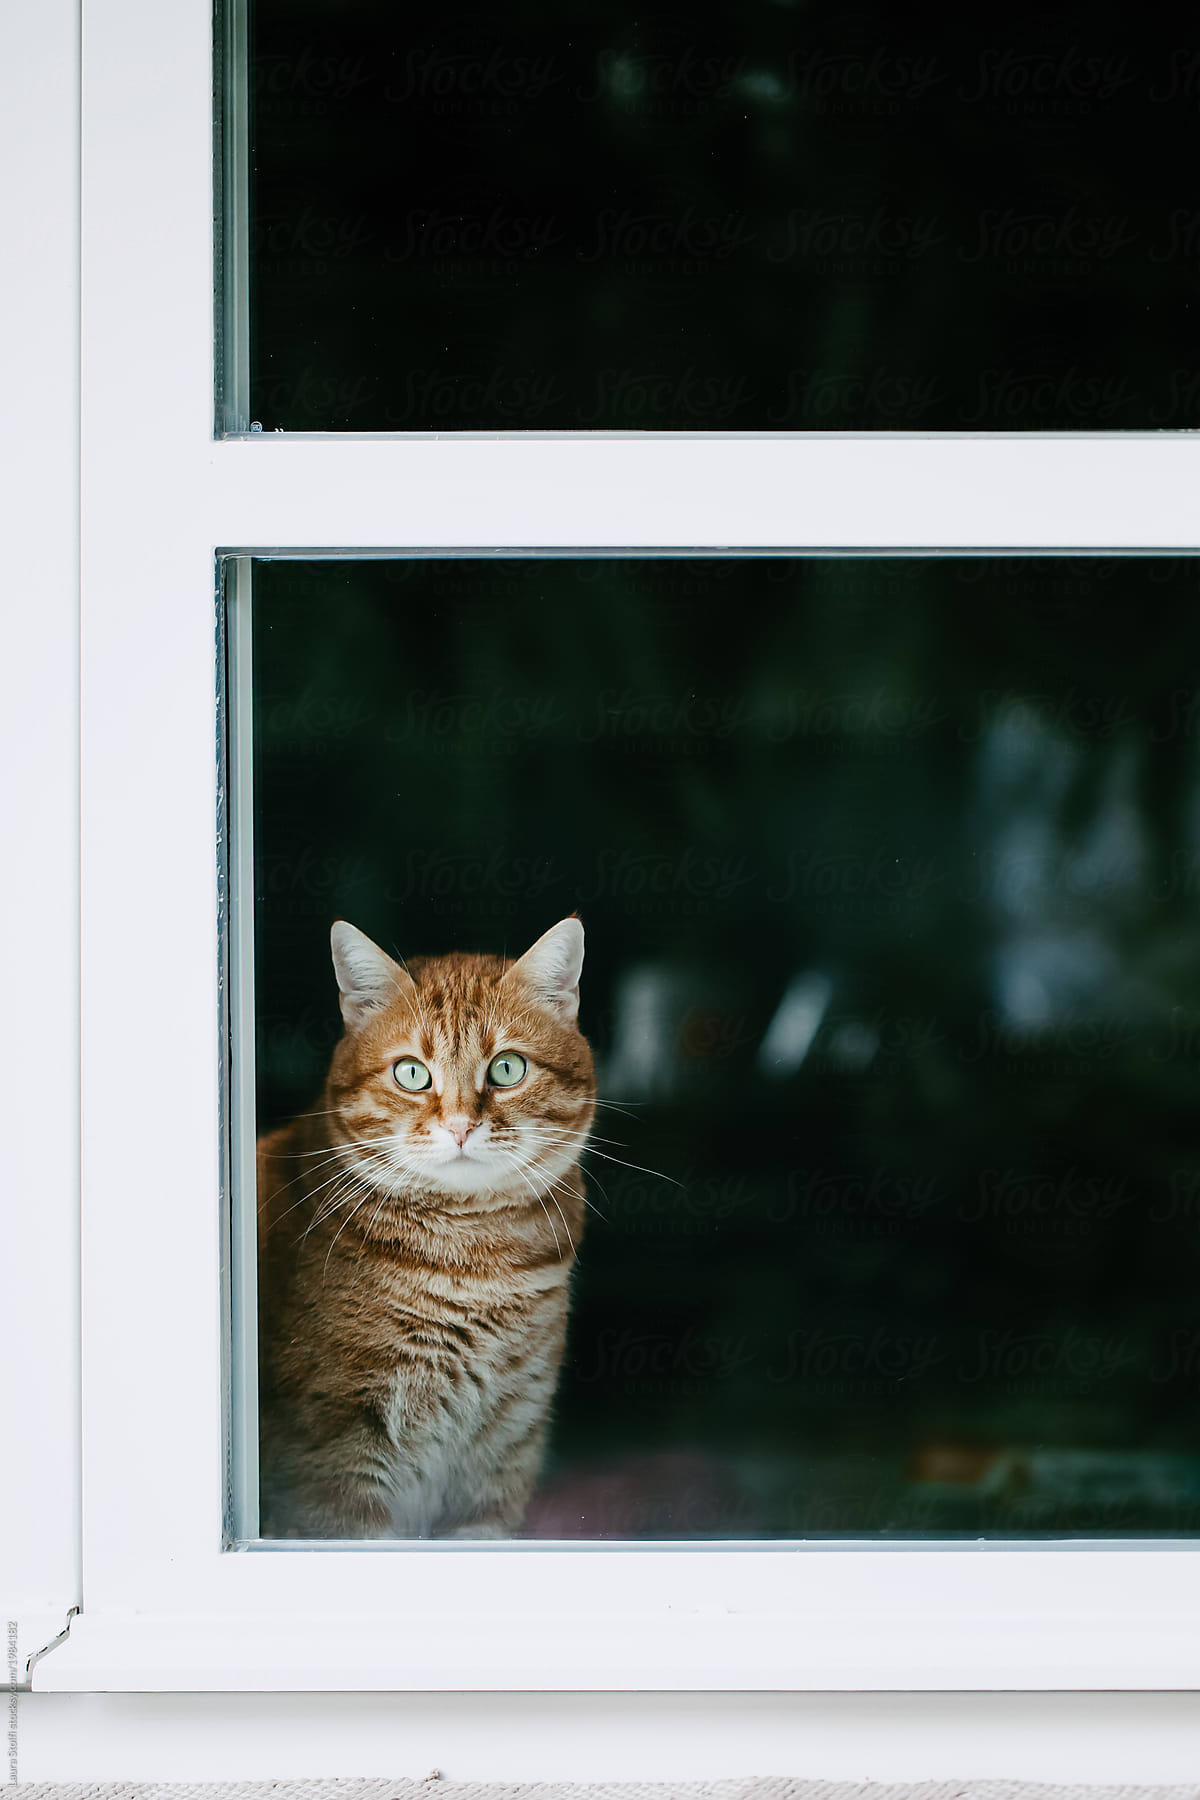 Big ginger cat looks straight at the camera while sitting indoors behind glass window